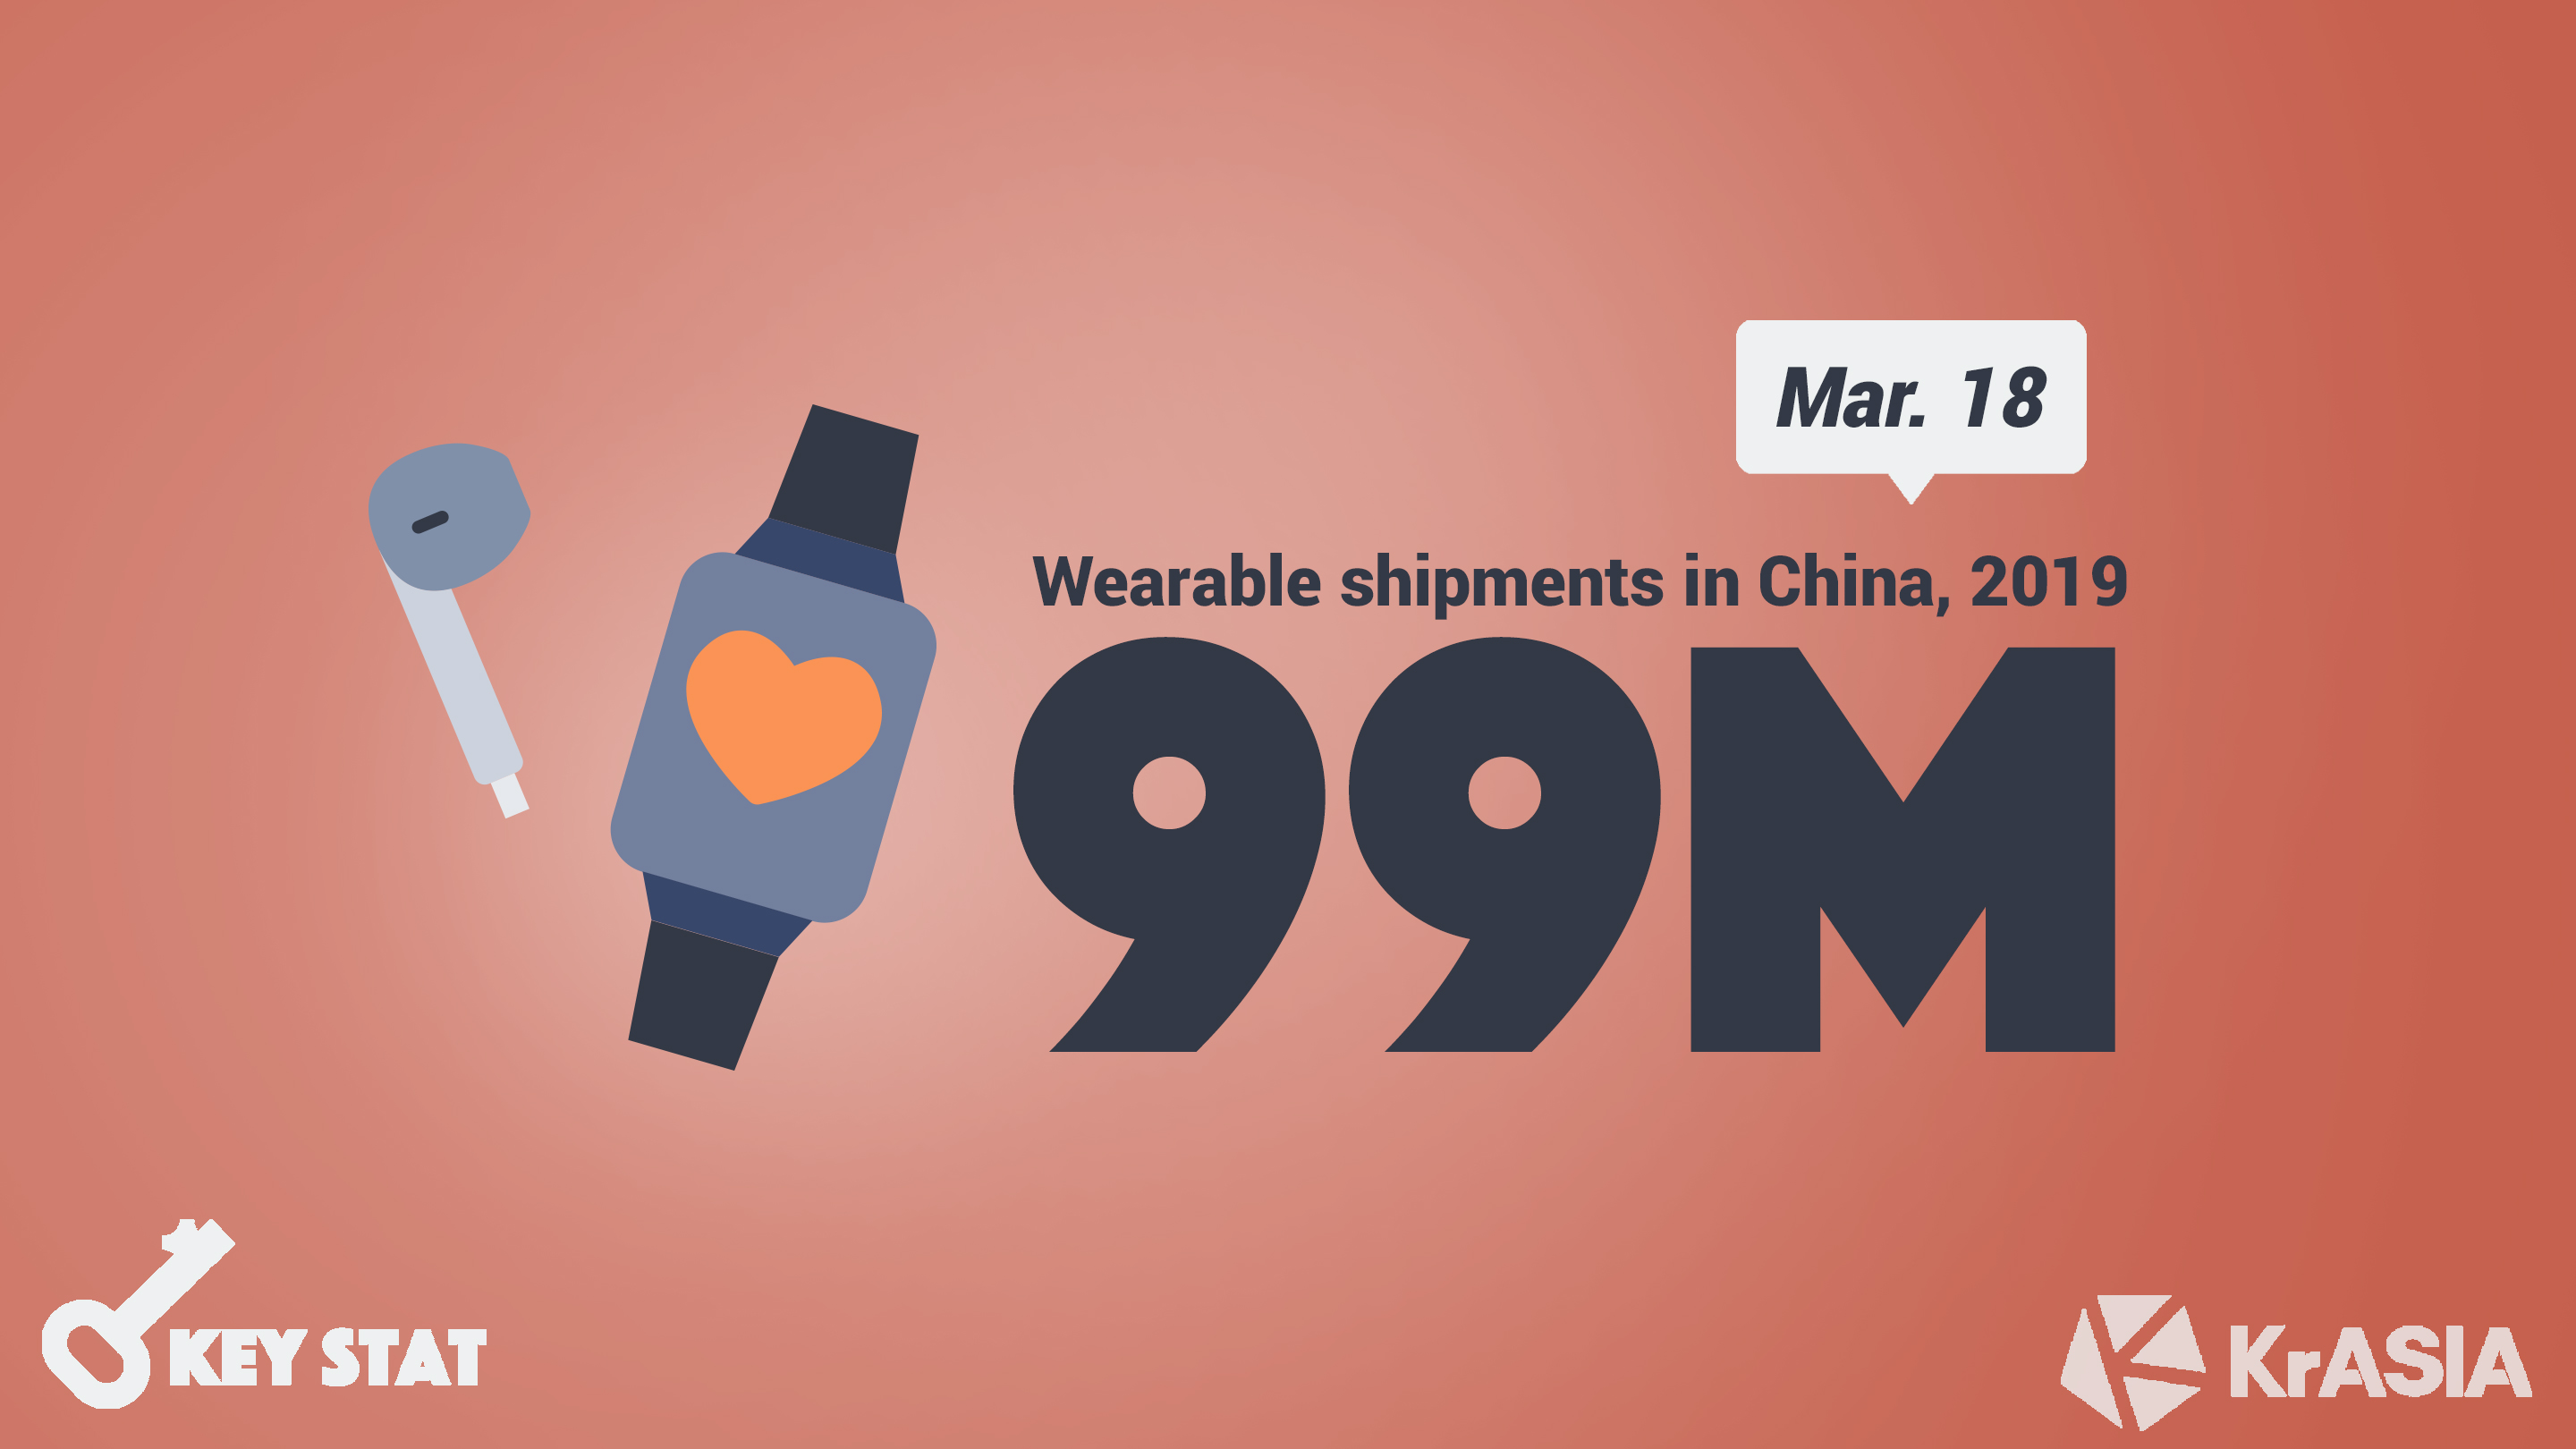 KEY STAT | China shipped 99 million wearable devices in 2019, 37% more than last year